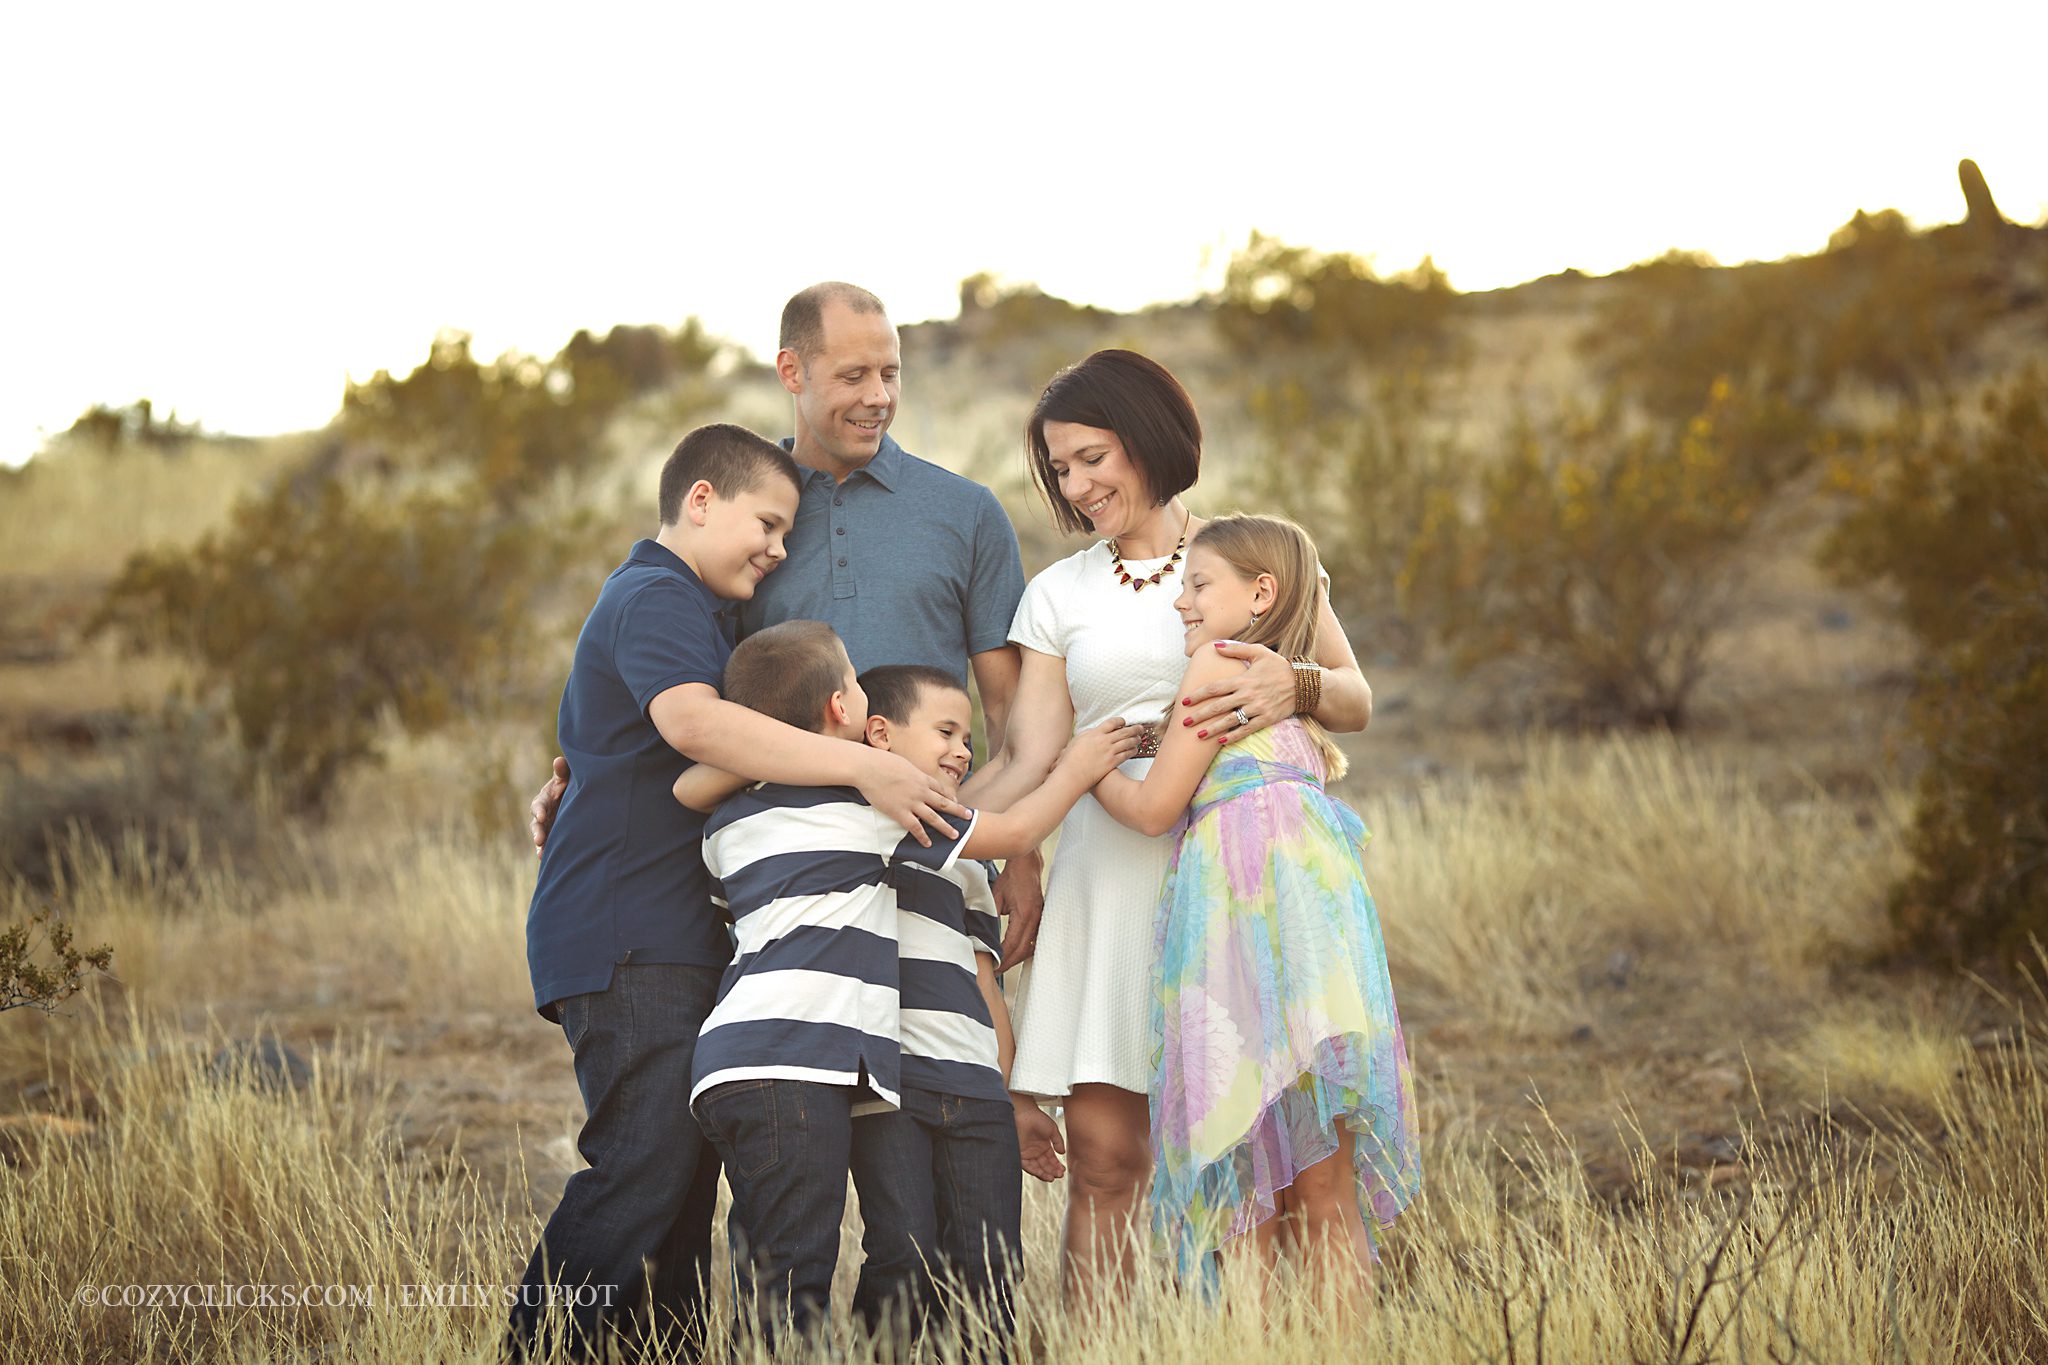 Fmaily hug photography on the mountain in Ahwatukee